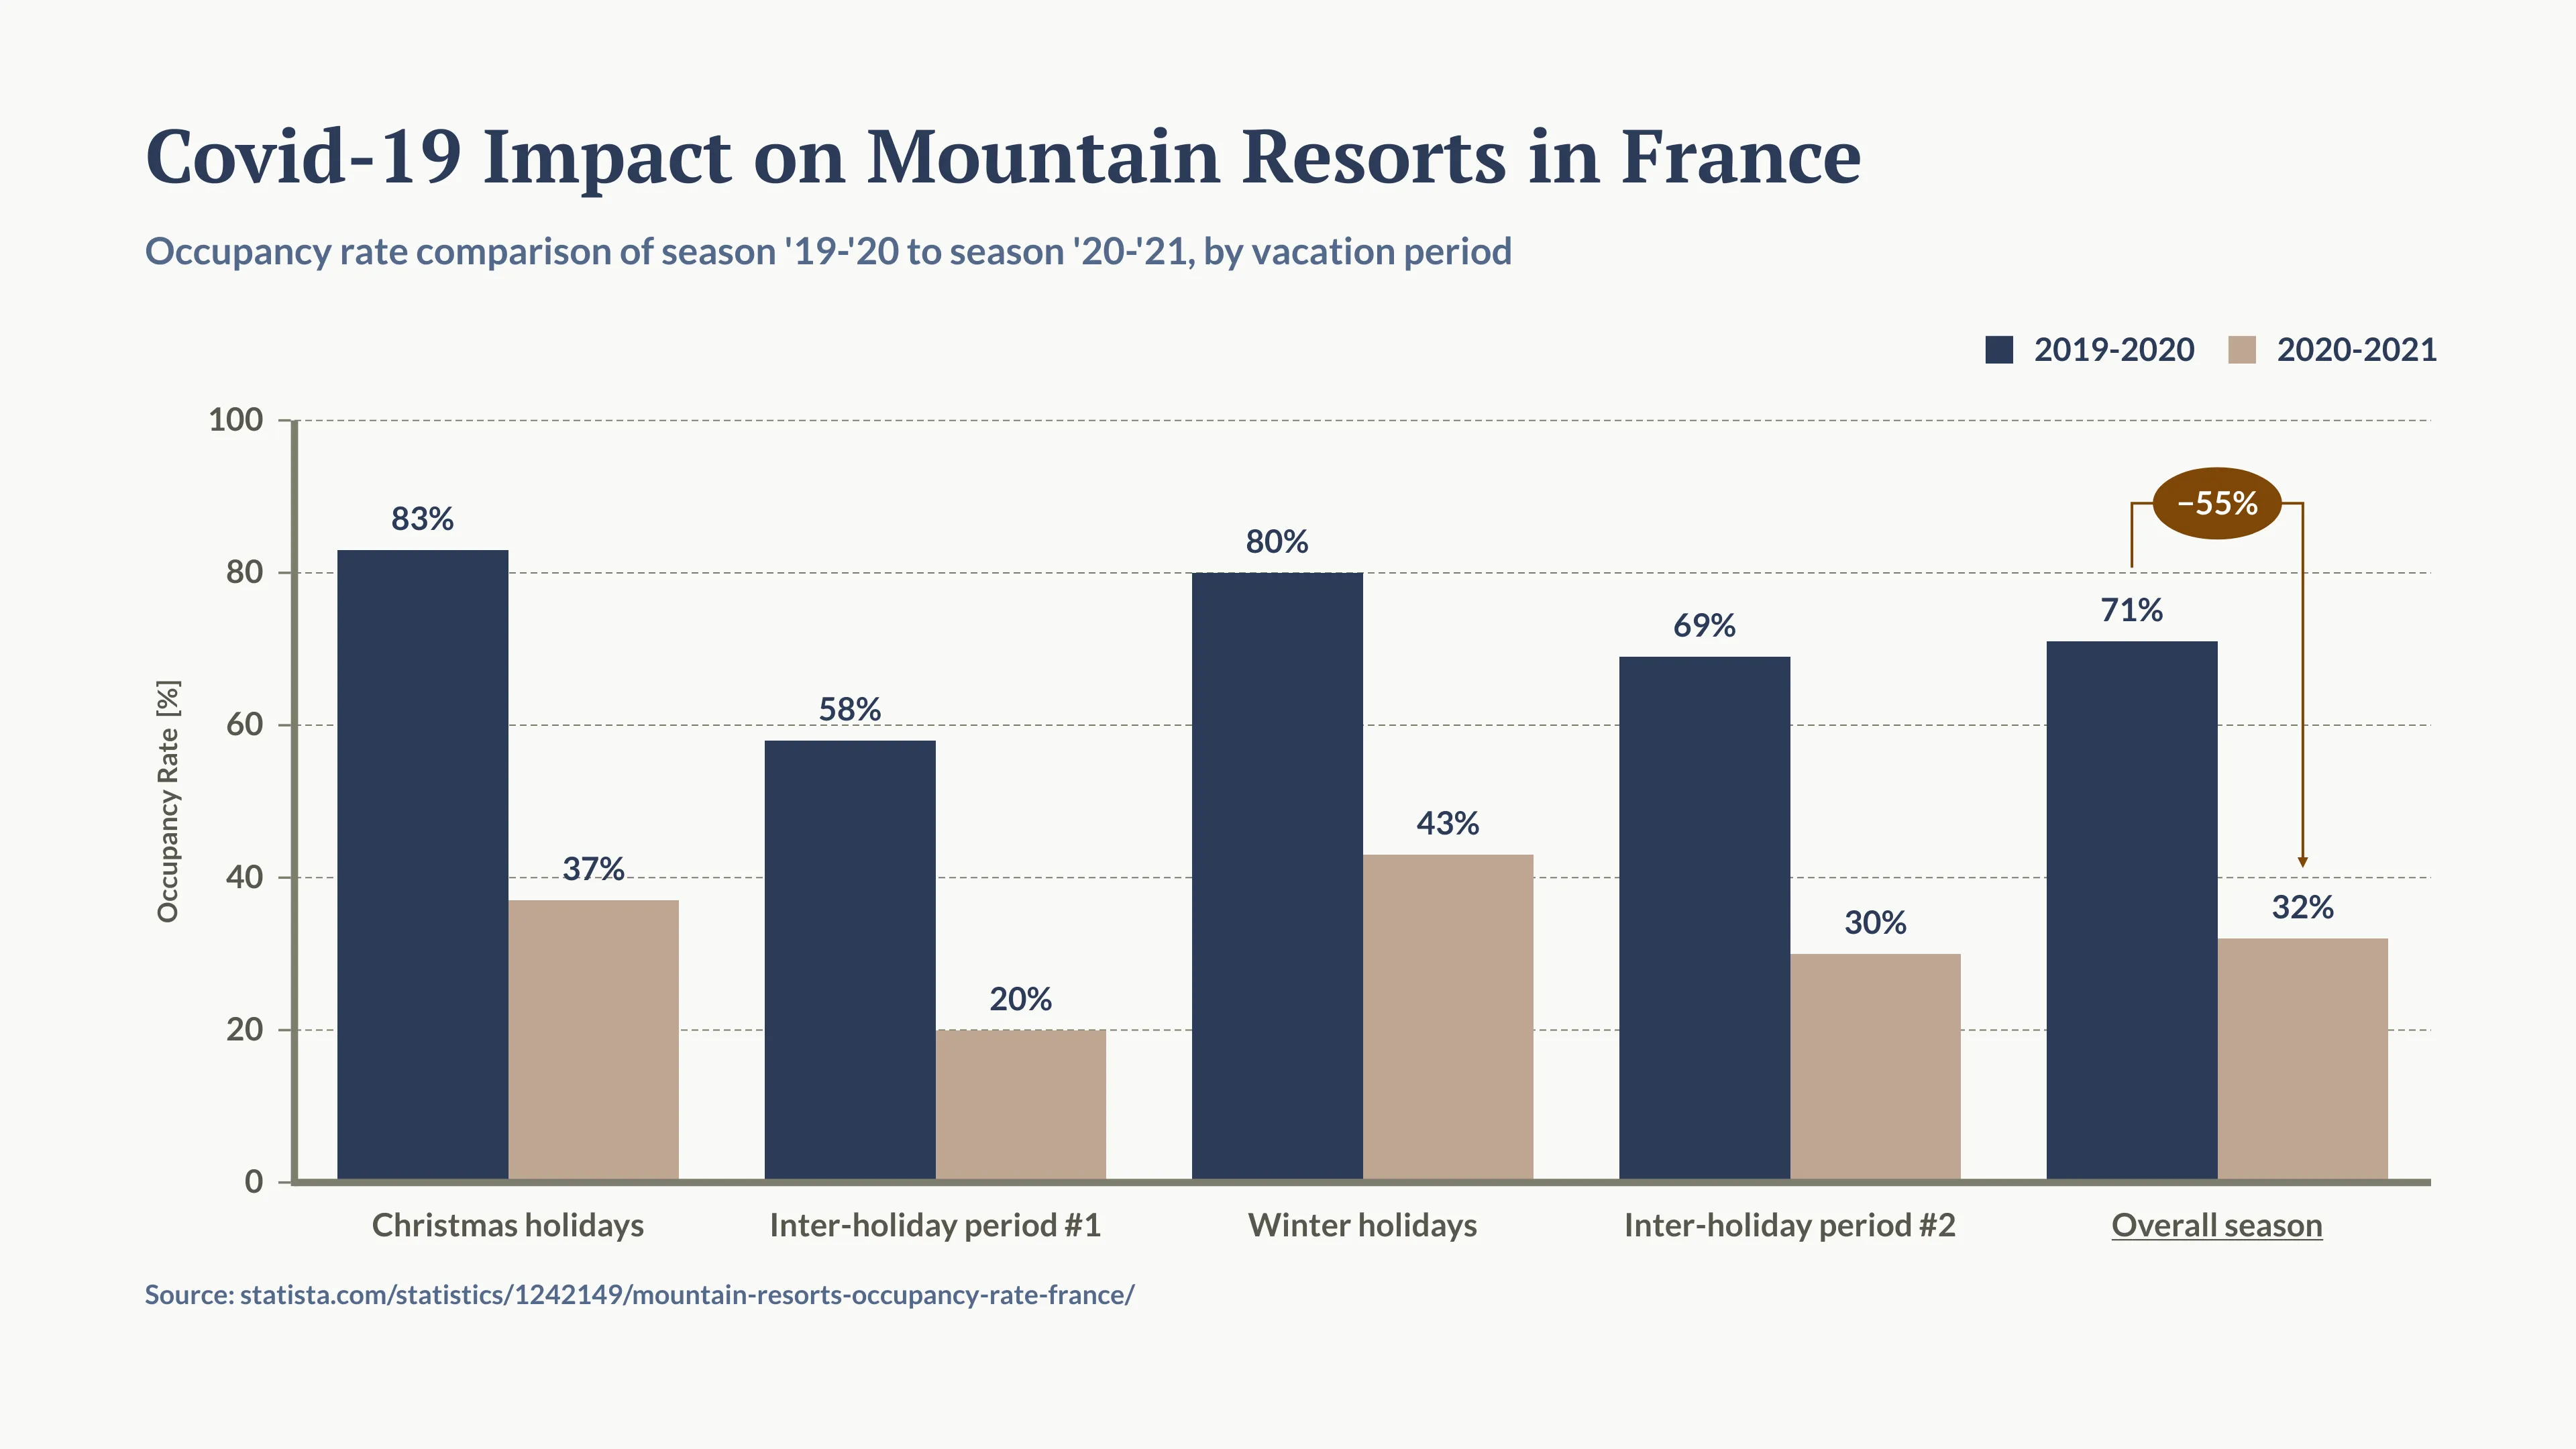 Covid-19 Impact on Mountain Resorts in France